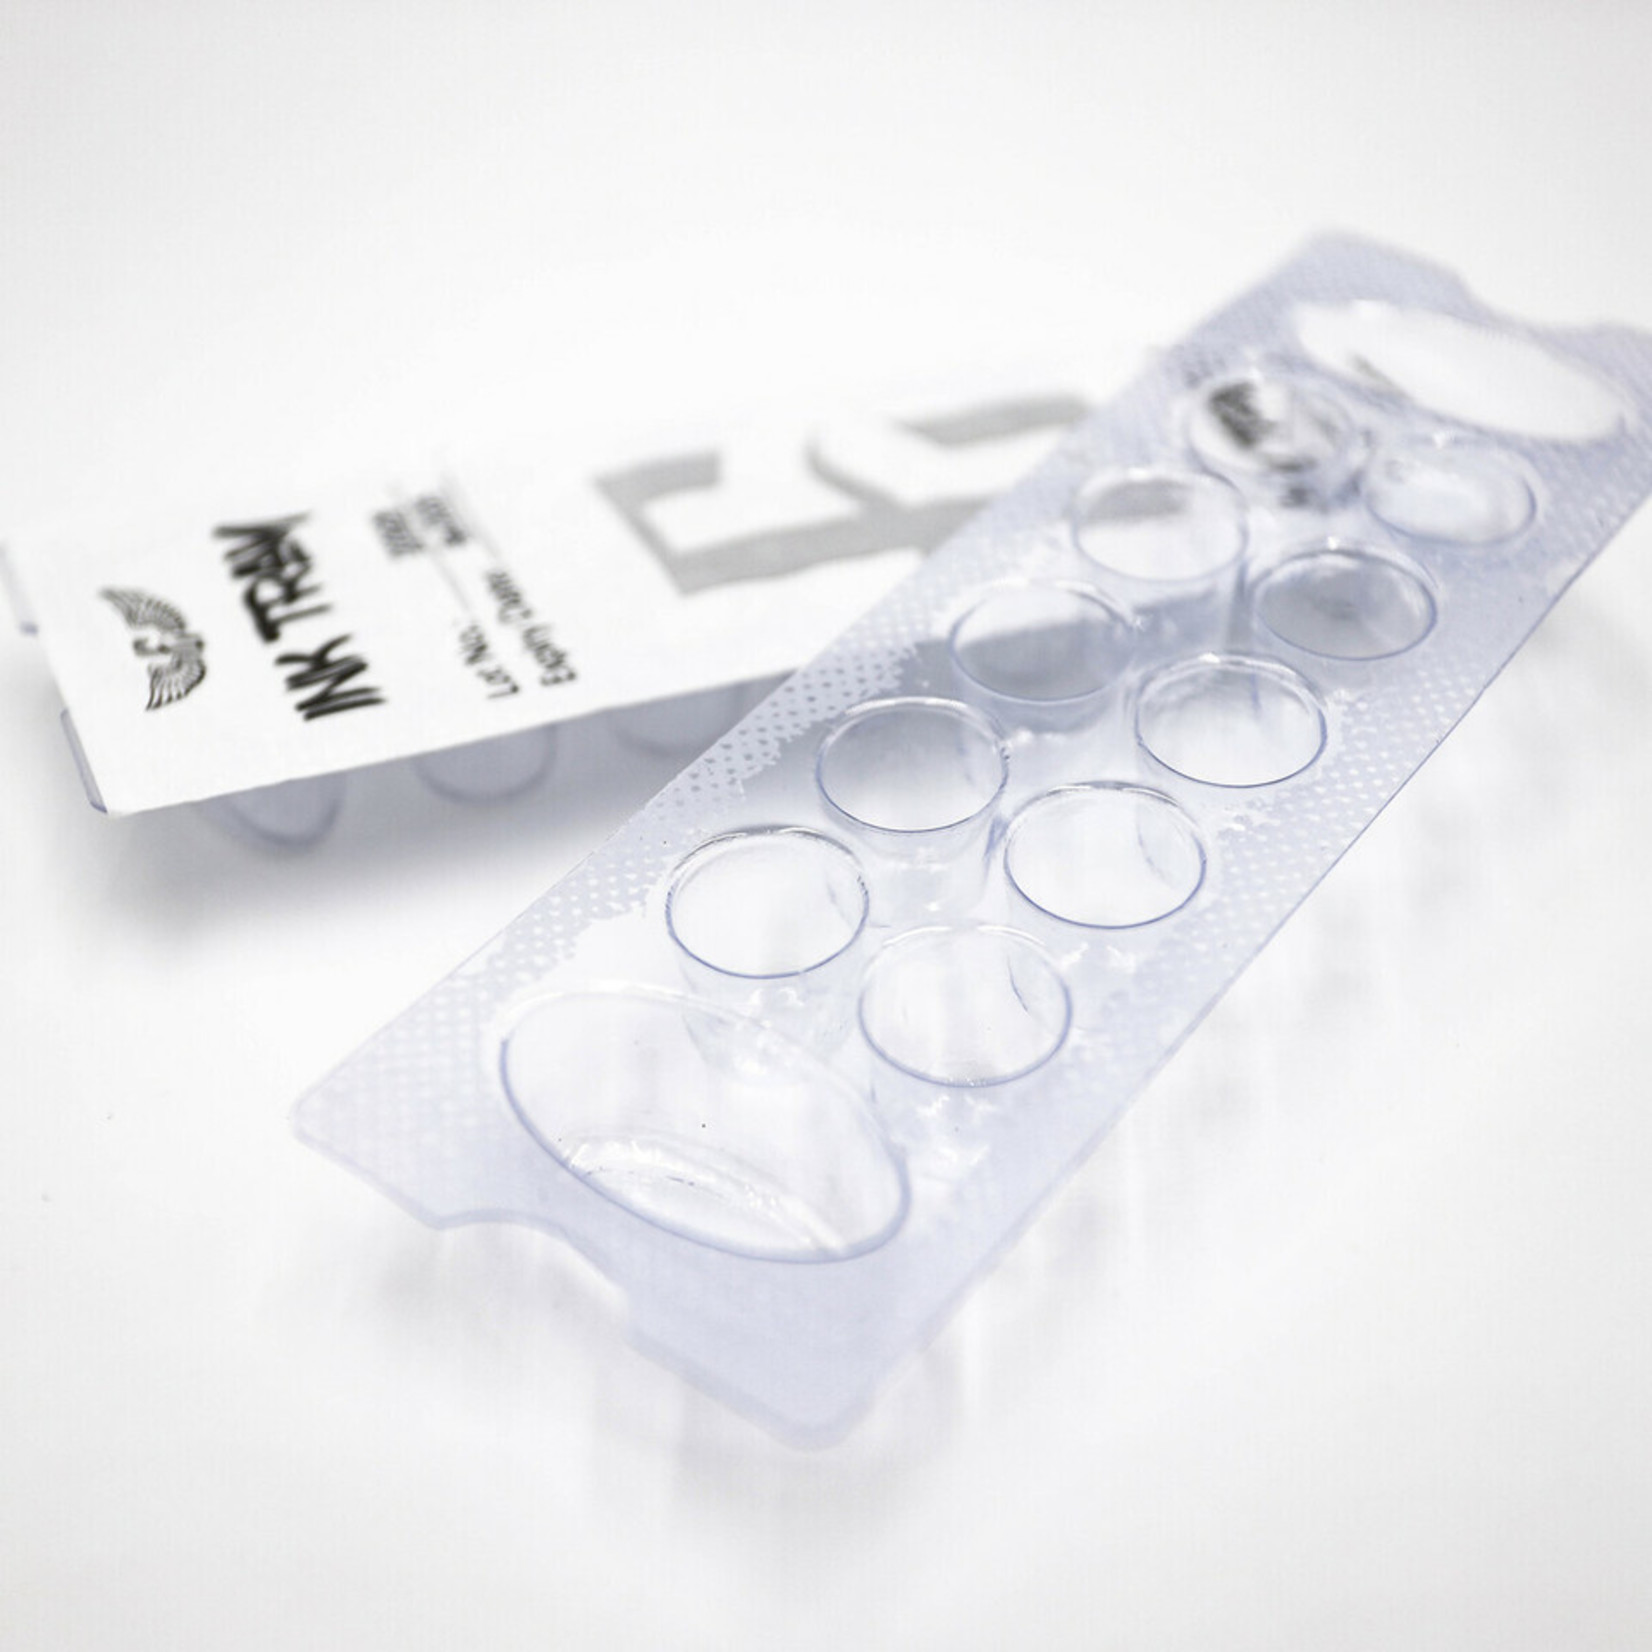 ELECTRUM DISPOSABLE STERILE INK CUP TRAYS - 50